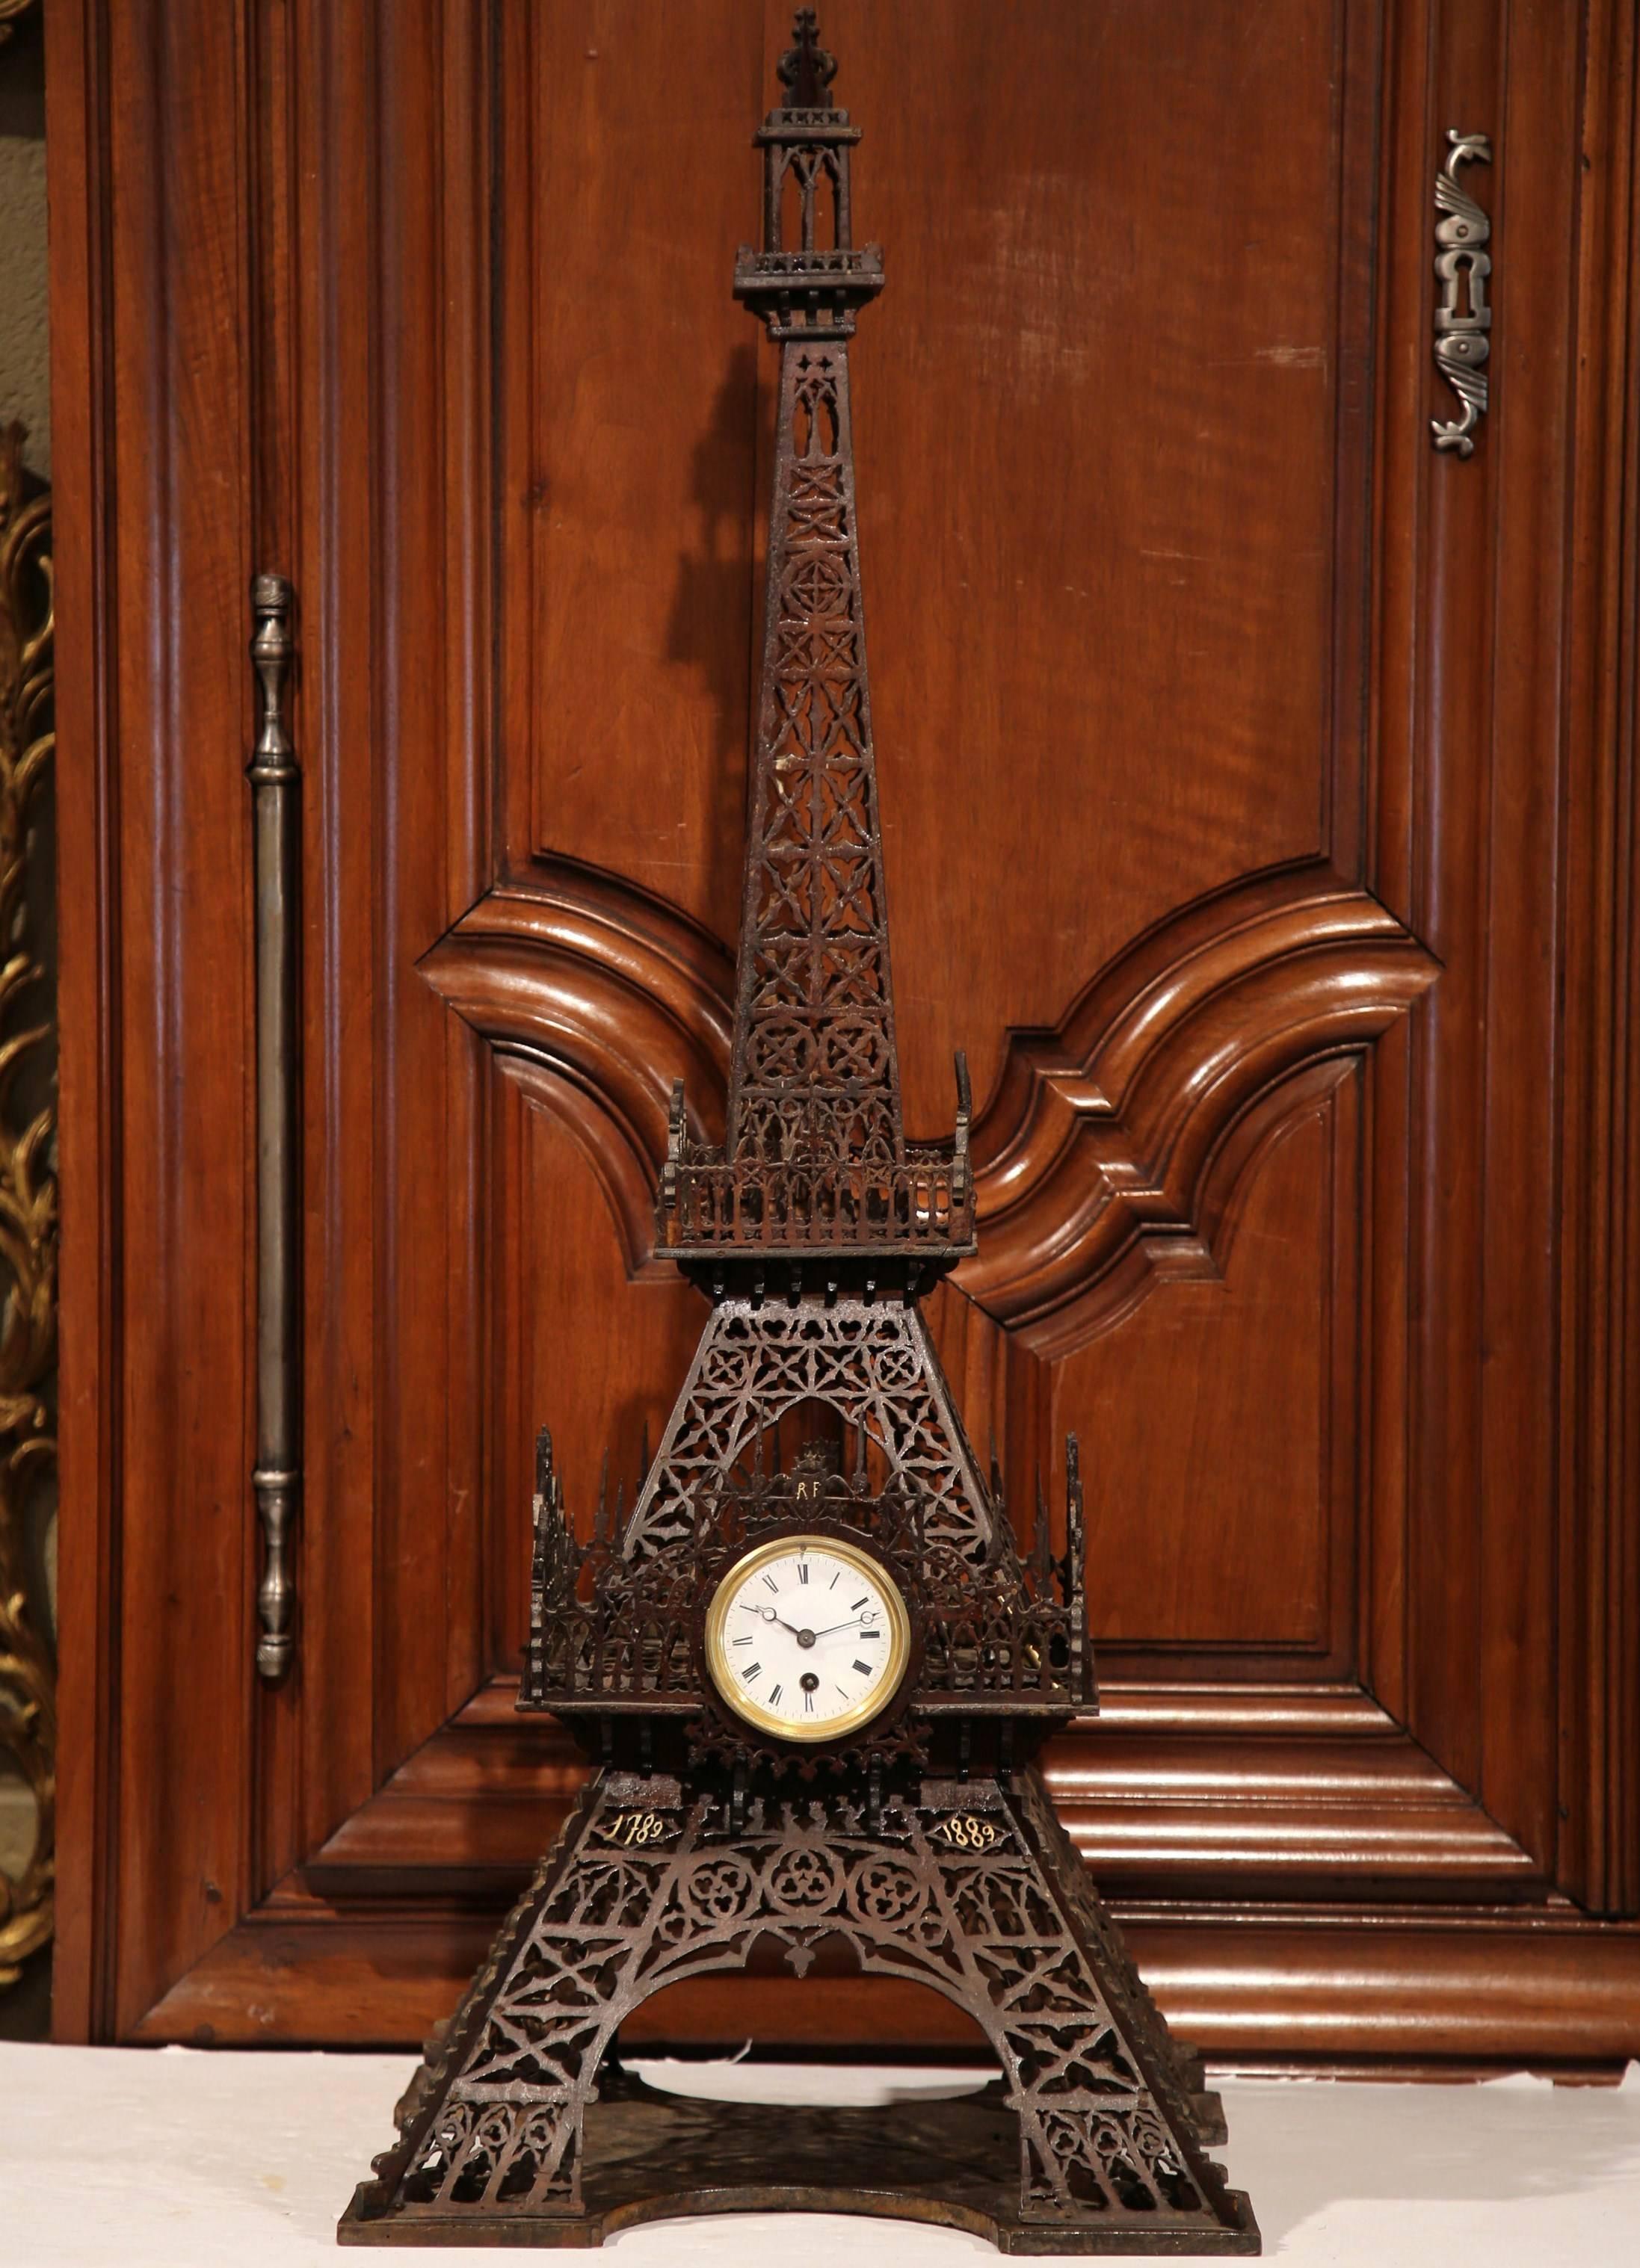 Decorate a shelf or mantel with this grand, antique, carved replica of the Eiffel Tower. Crafted in France circa 1890, the symbolic, intricate architectural symbol is embellished with the original center clock; the movement has been cleaned and